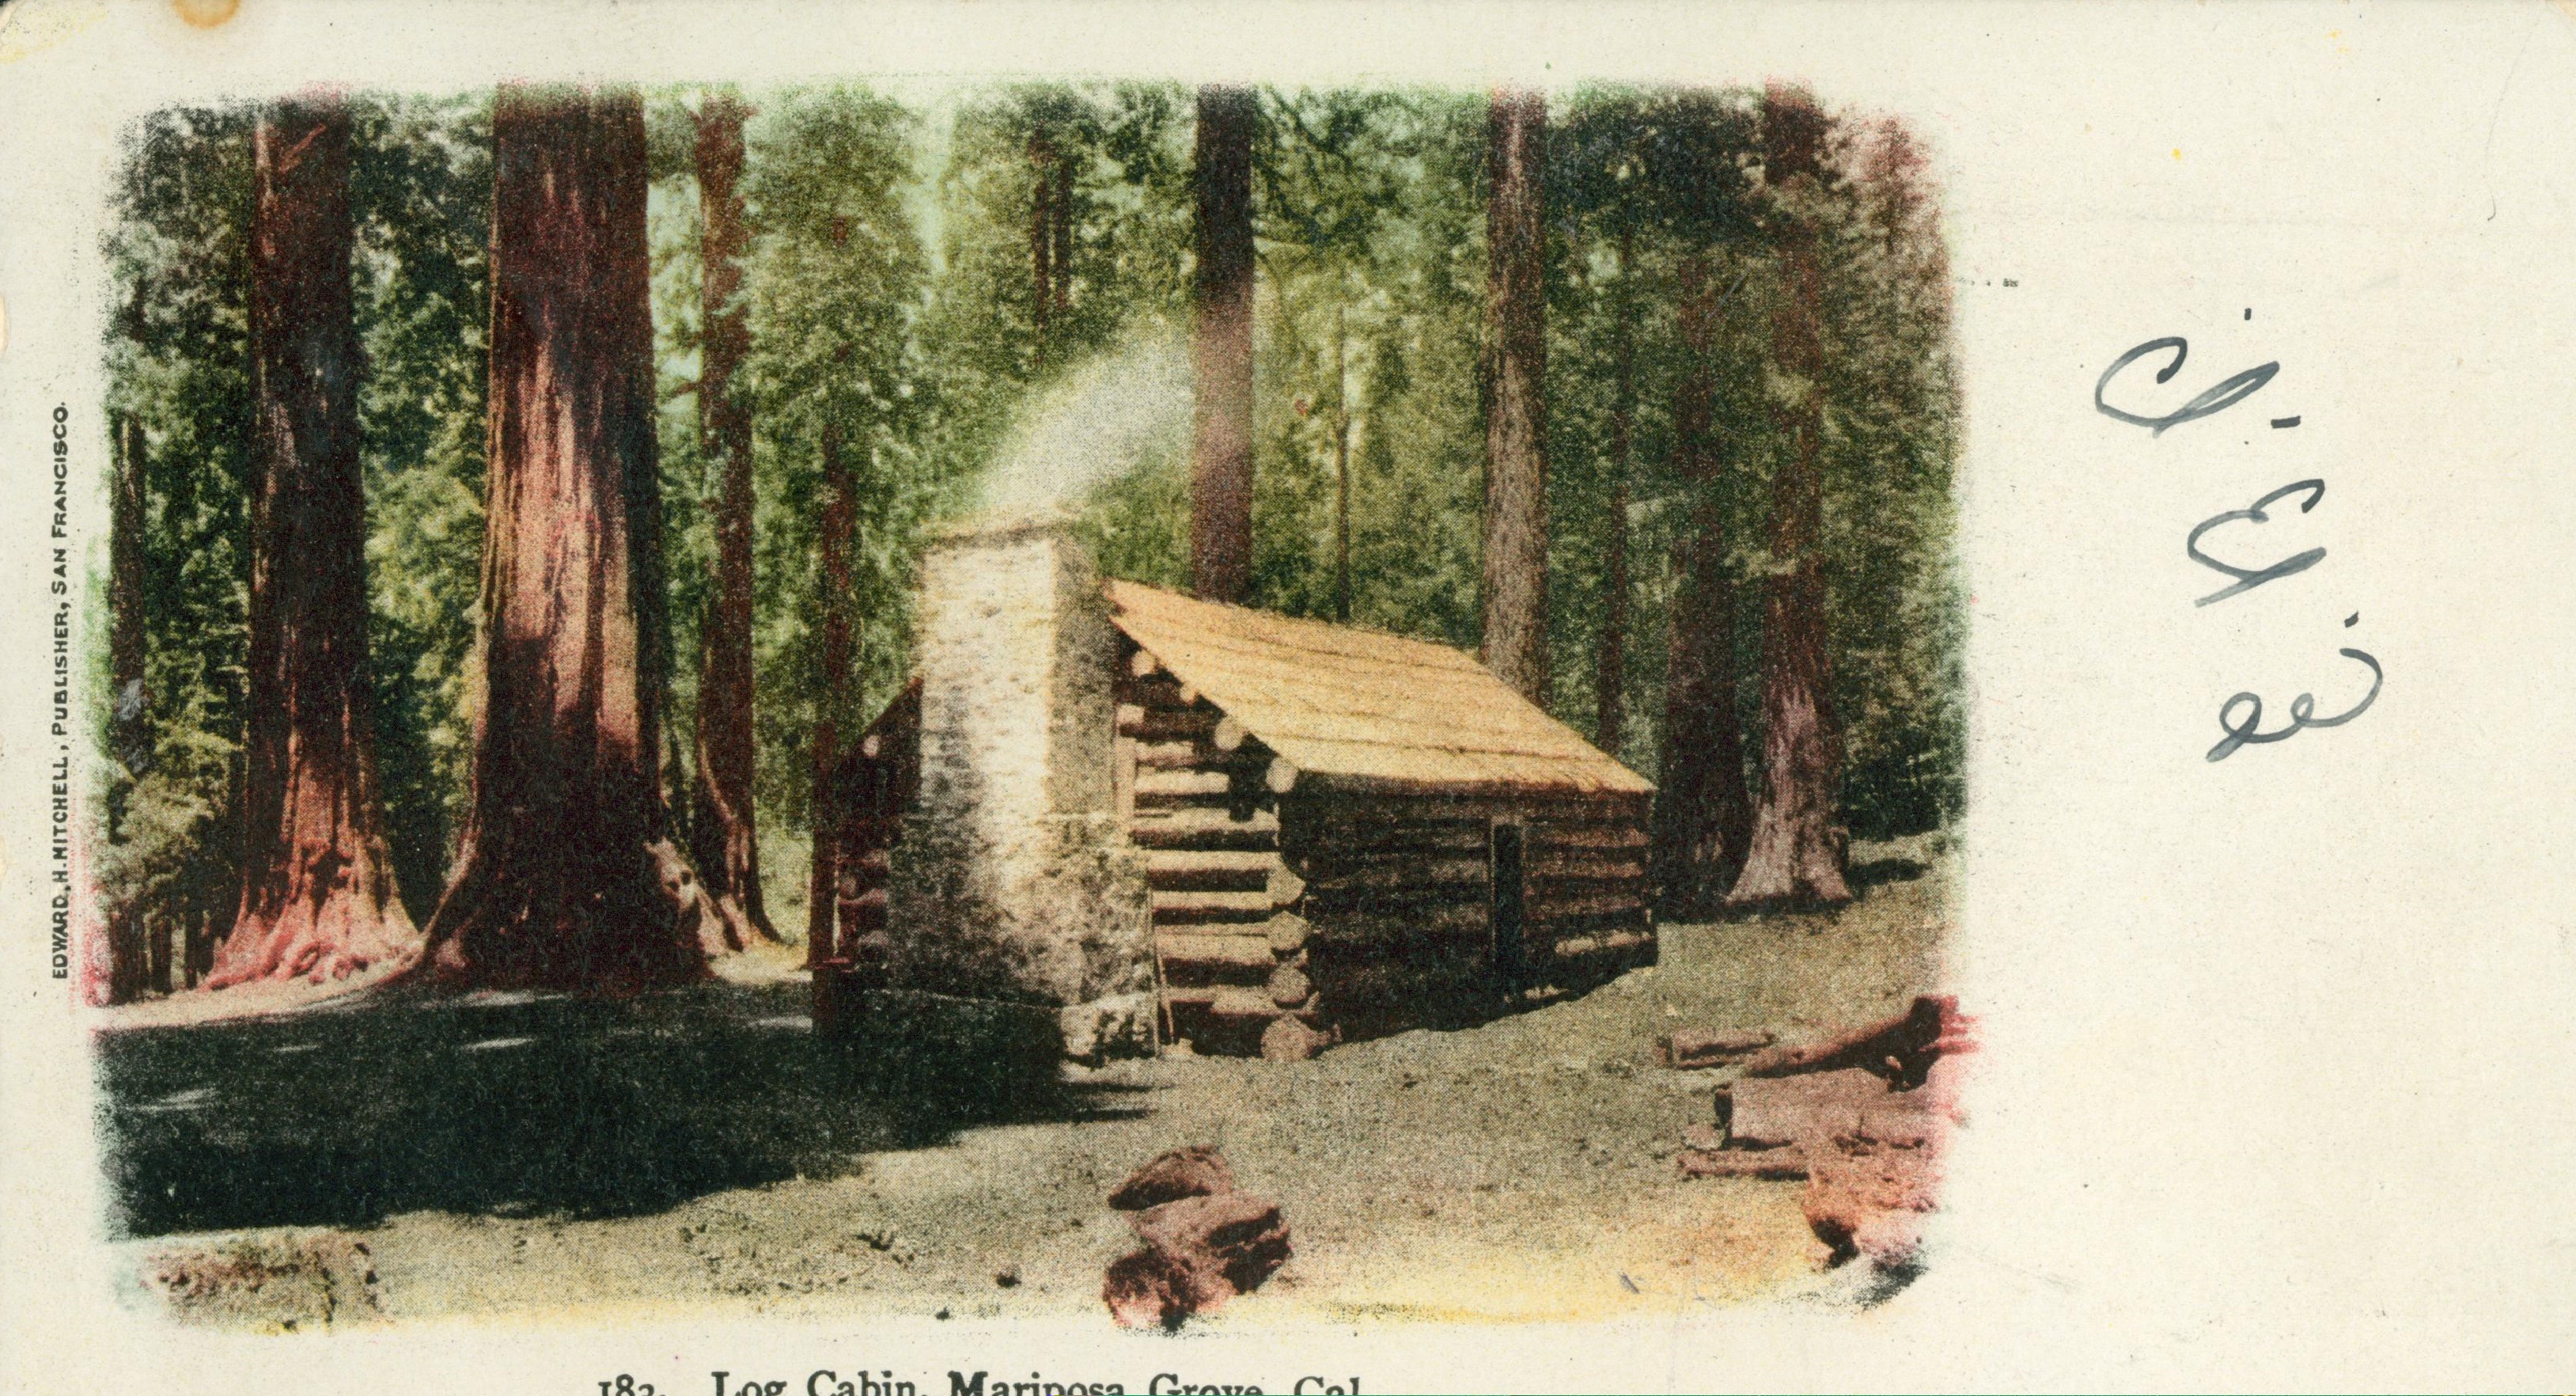 Shows a log cabin in a forest